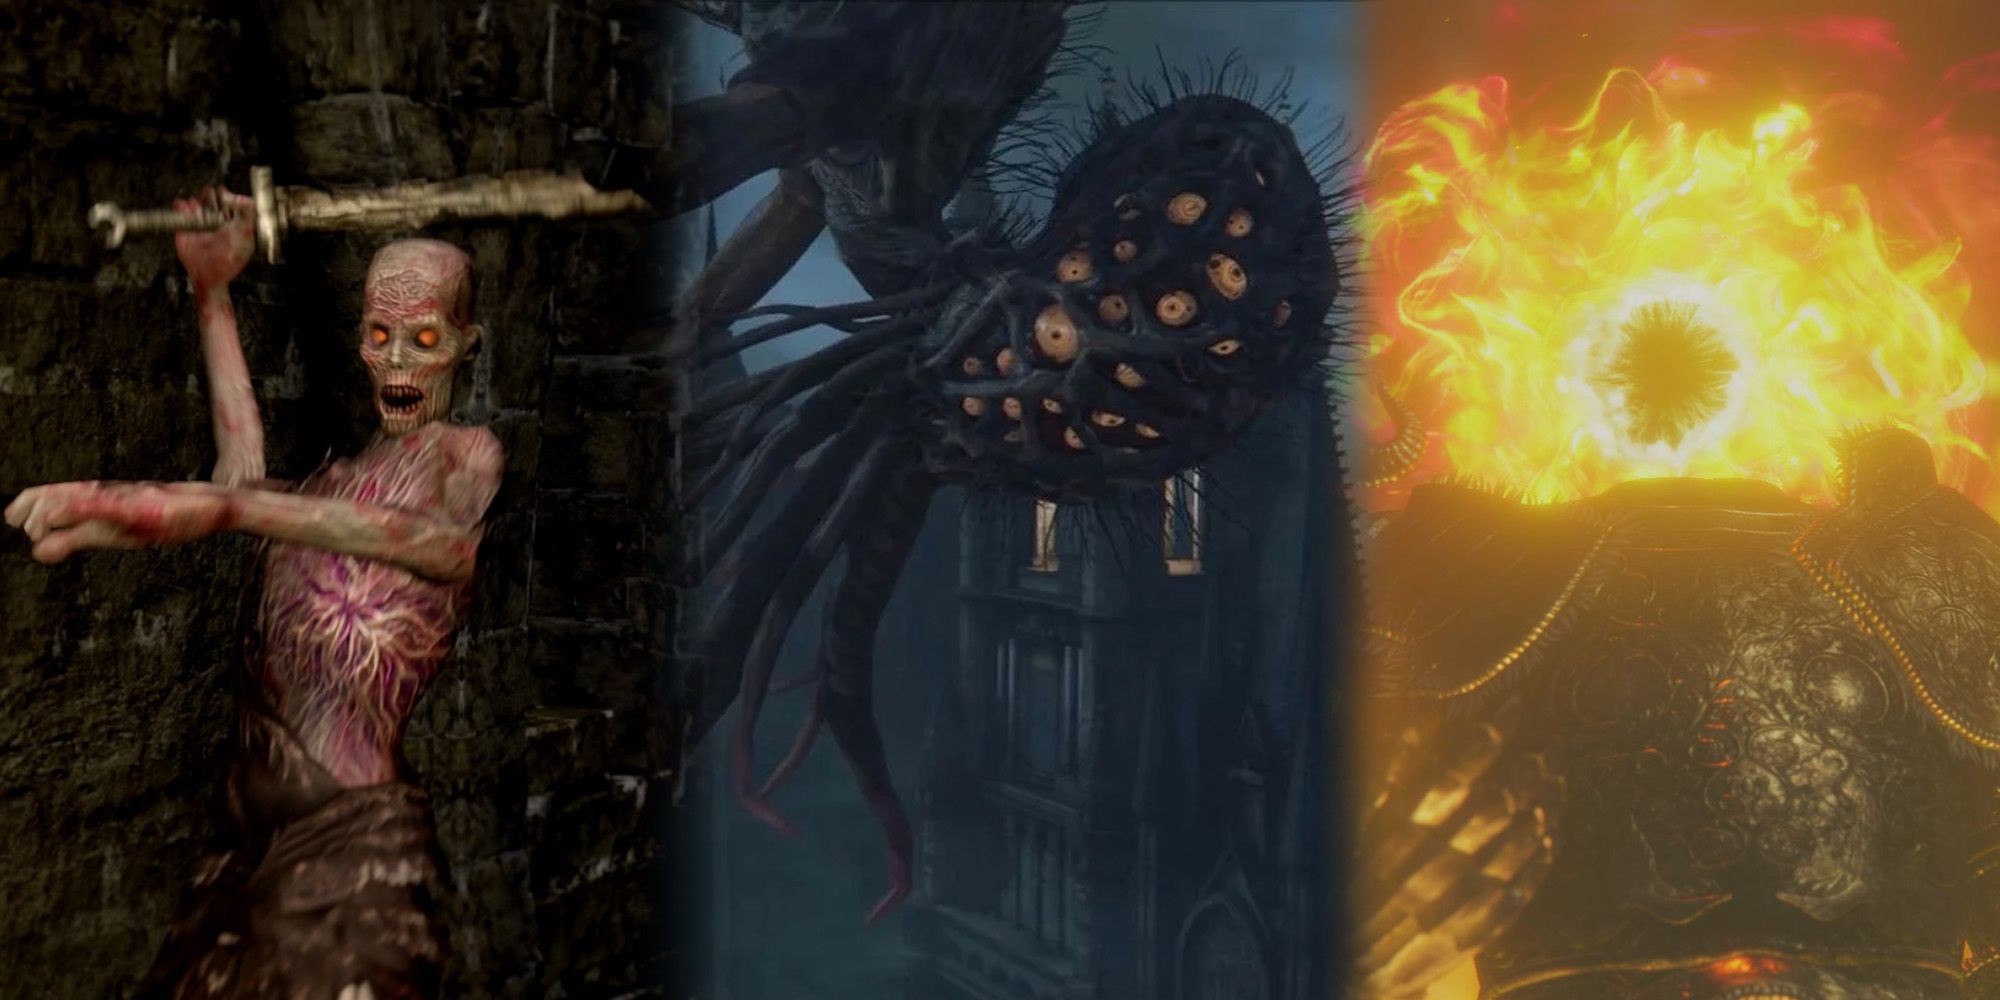 Elden Ring - Three Side By Side Images Of Hollow In DS1, Amygdala in Bloodborne, and Frenzy Flame in Elden Ring